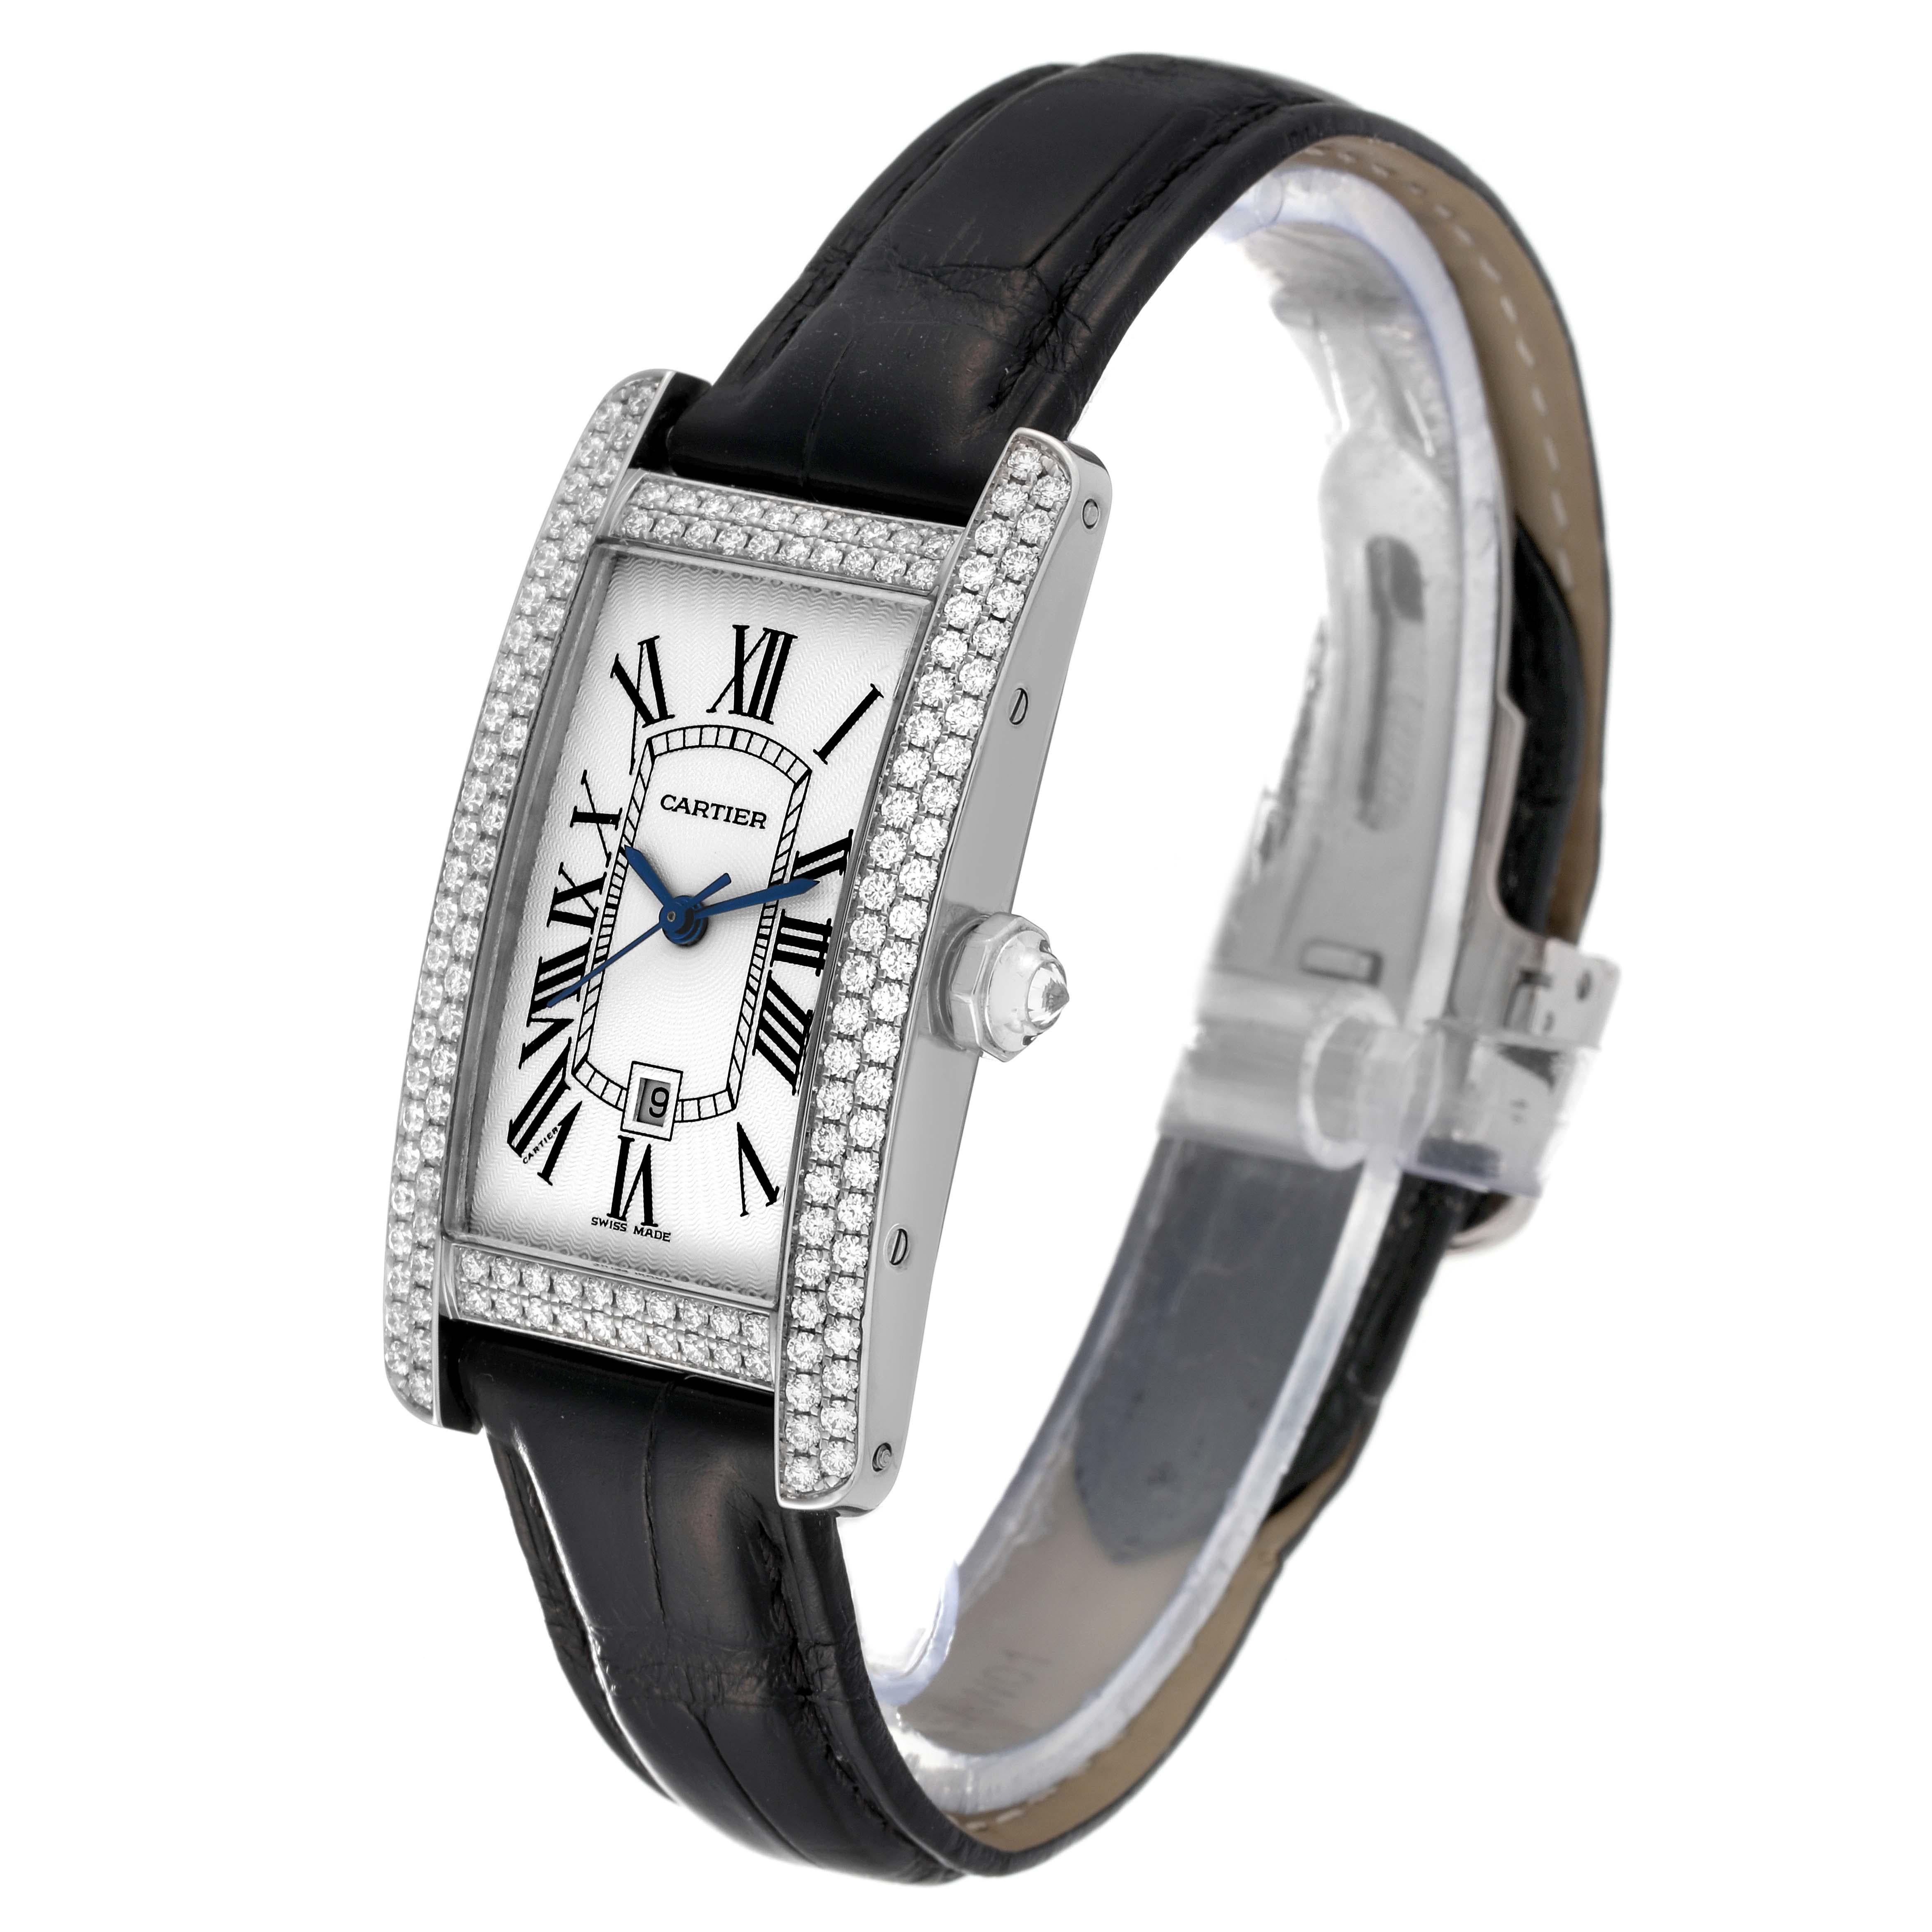 Cartier Tank Americaine White Gold Diamond Ladies Watch 2490 In Excellent Condition For Sale In Atlanta, GA